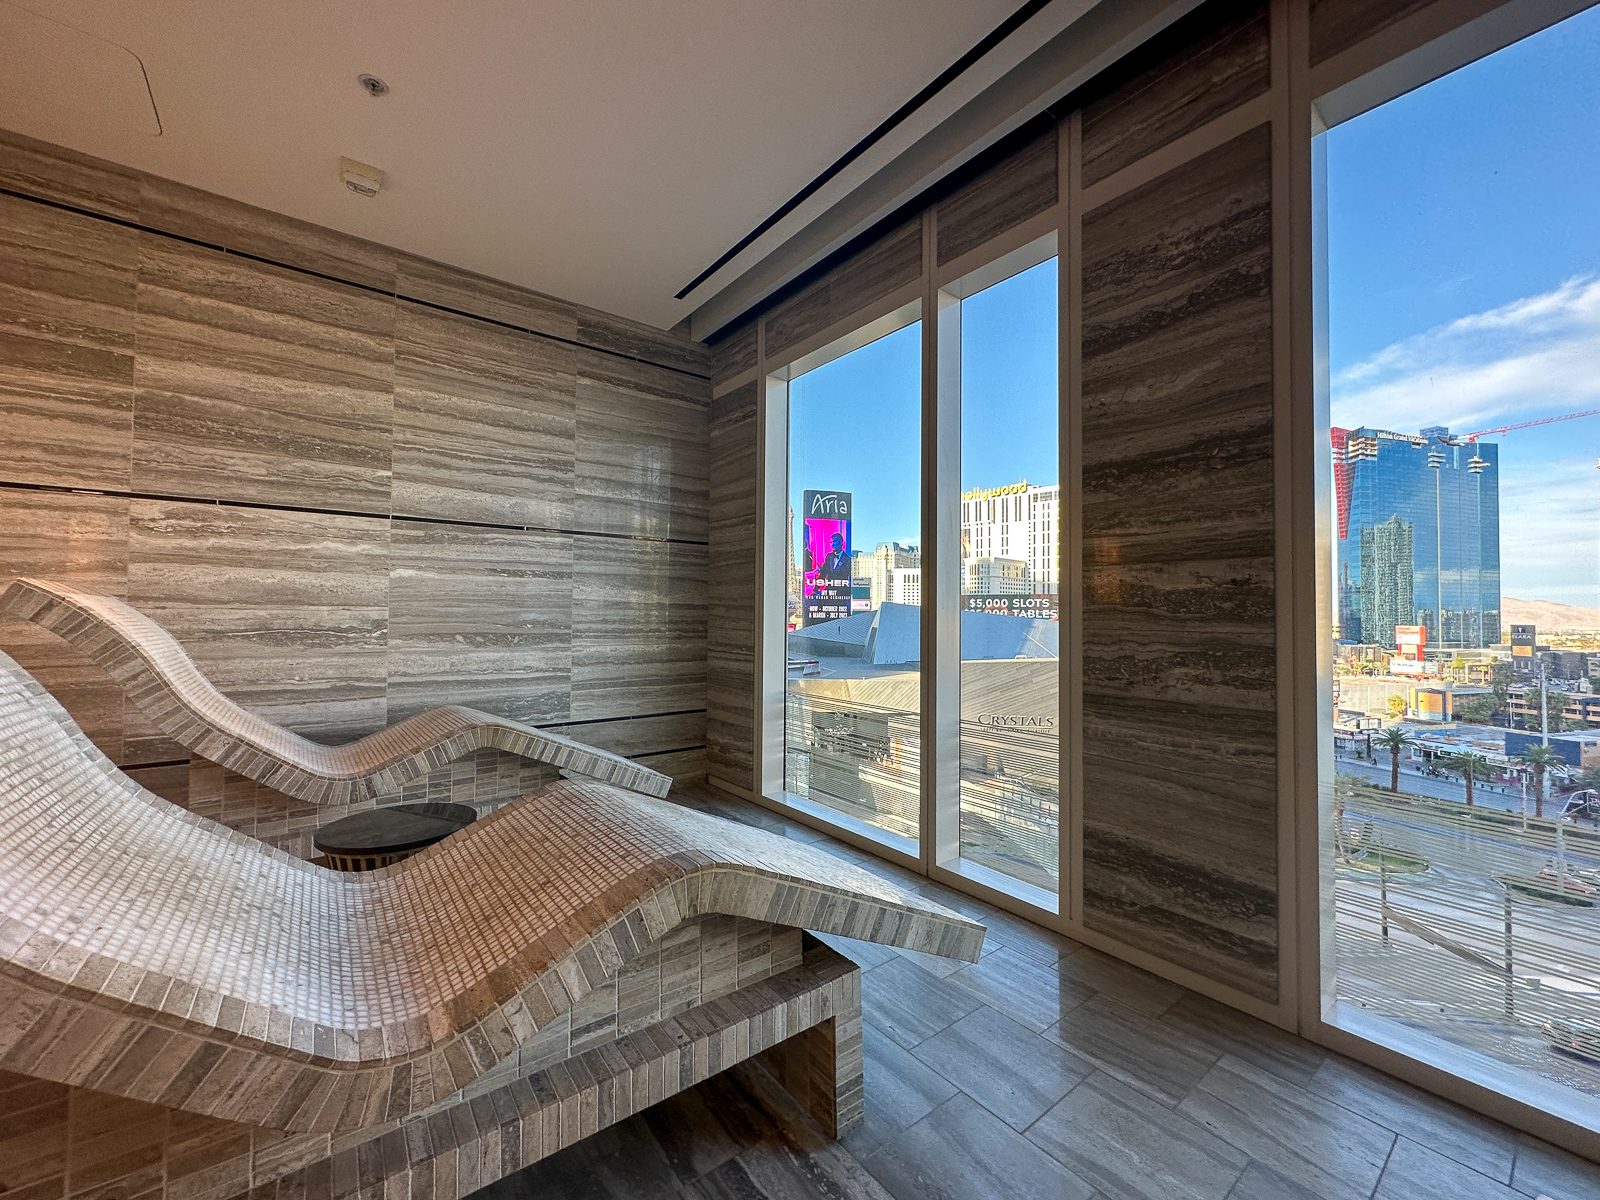 Waldorf Astoria Las Vegas Review: What To REALLY Expect If You Stay